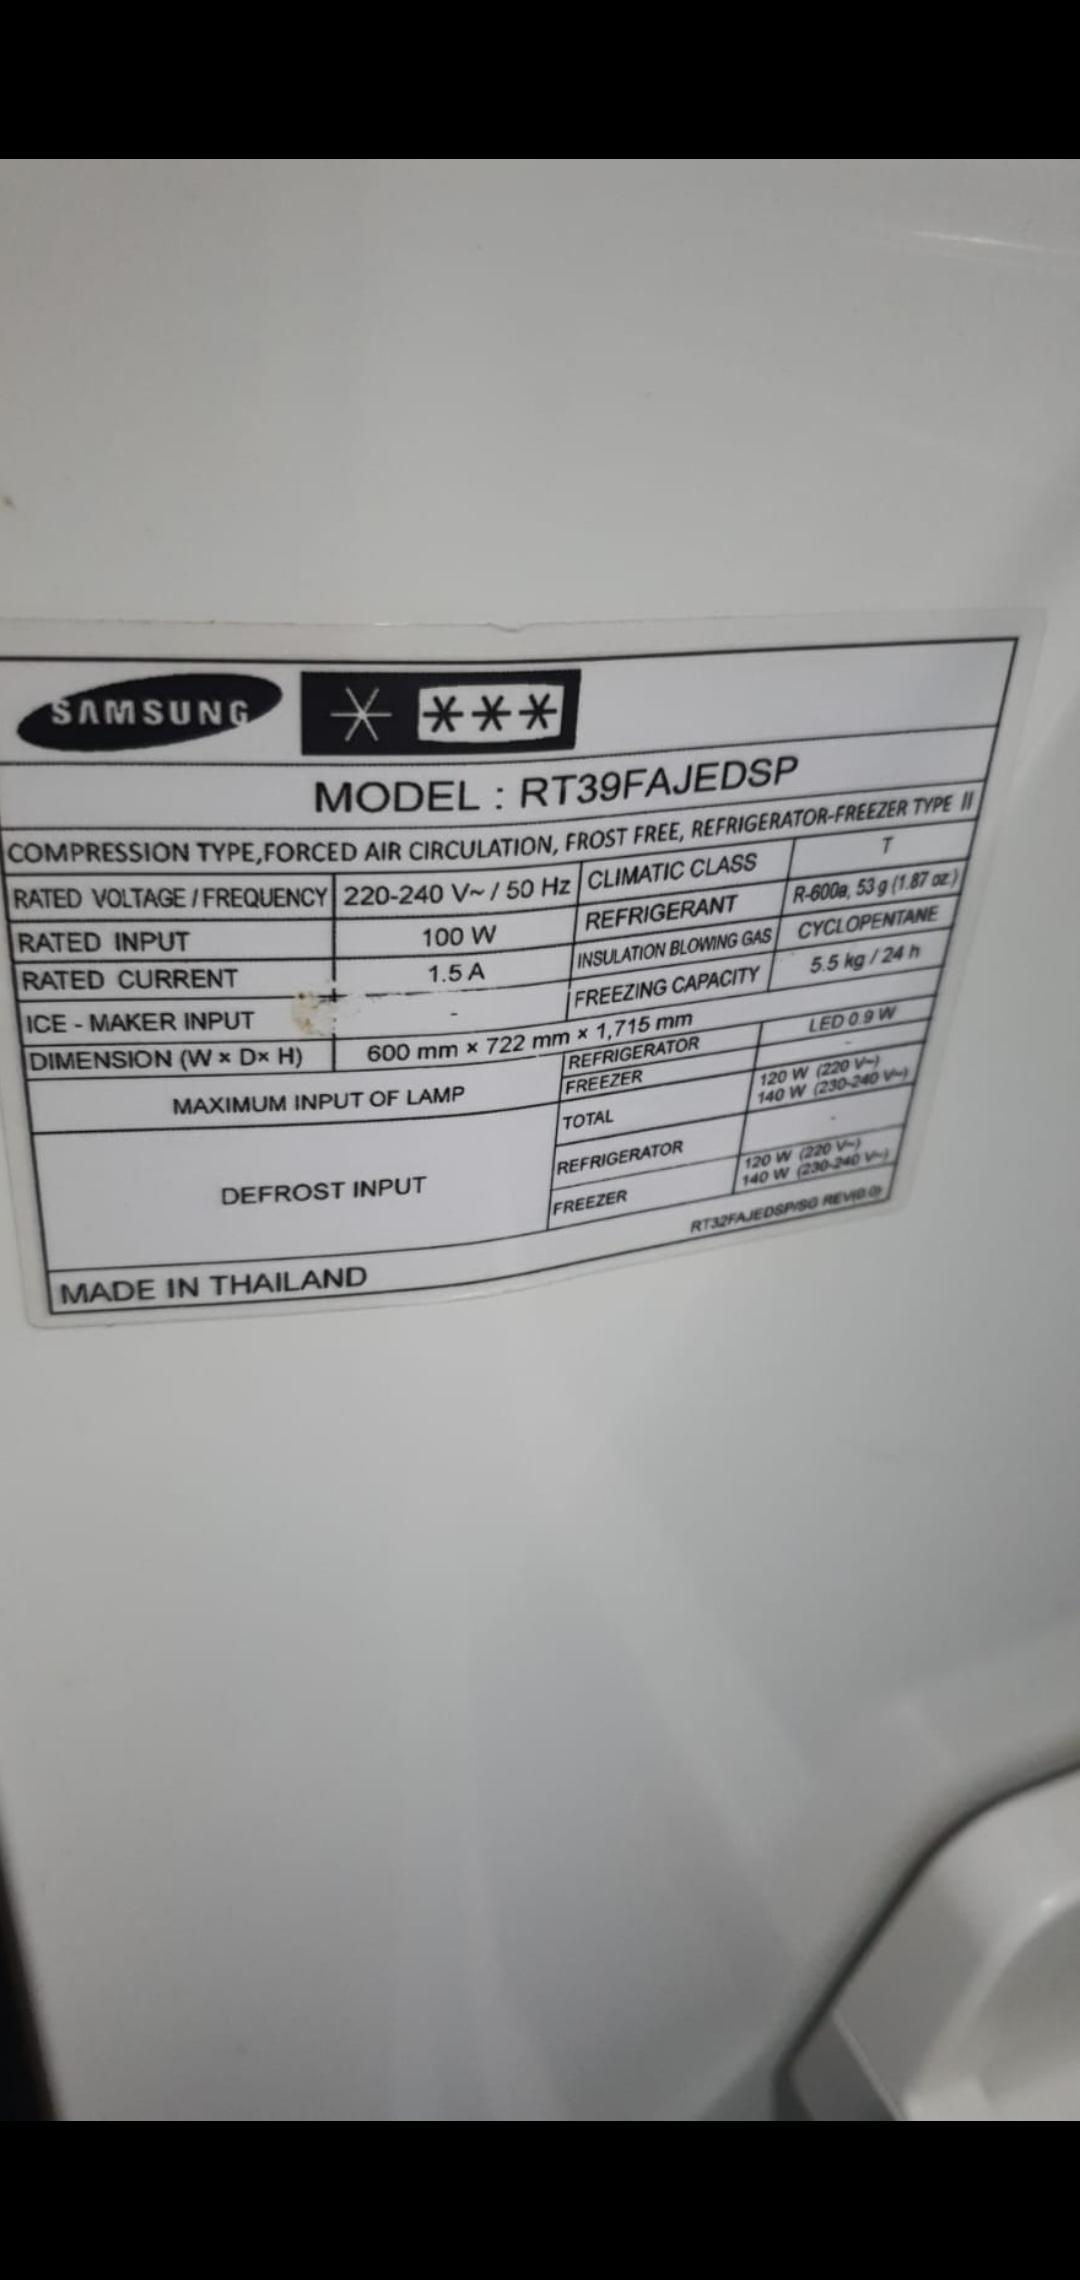 My Samsung Fridge ia not cooling afted power interruption.